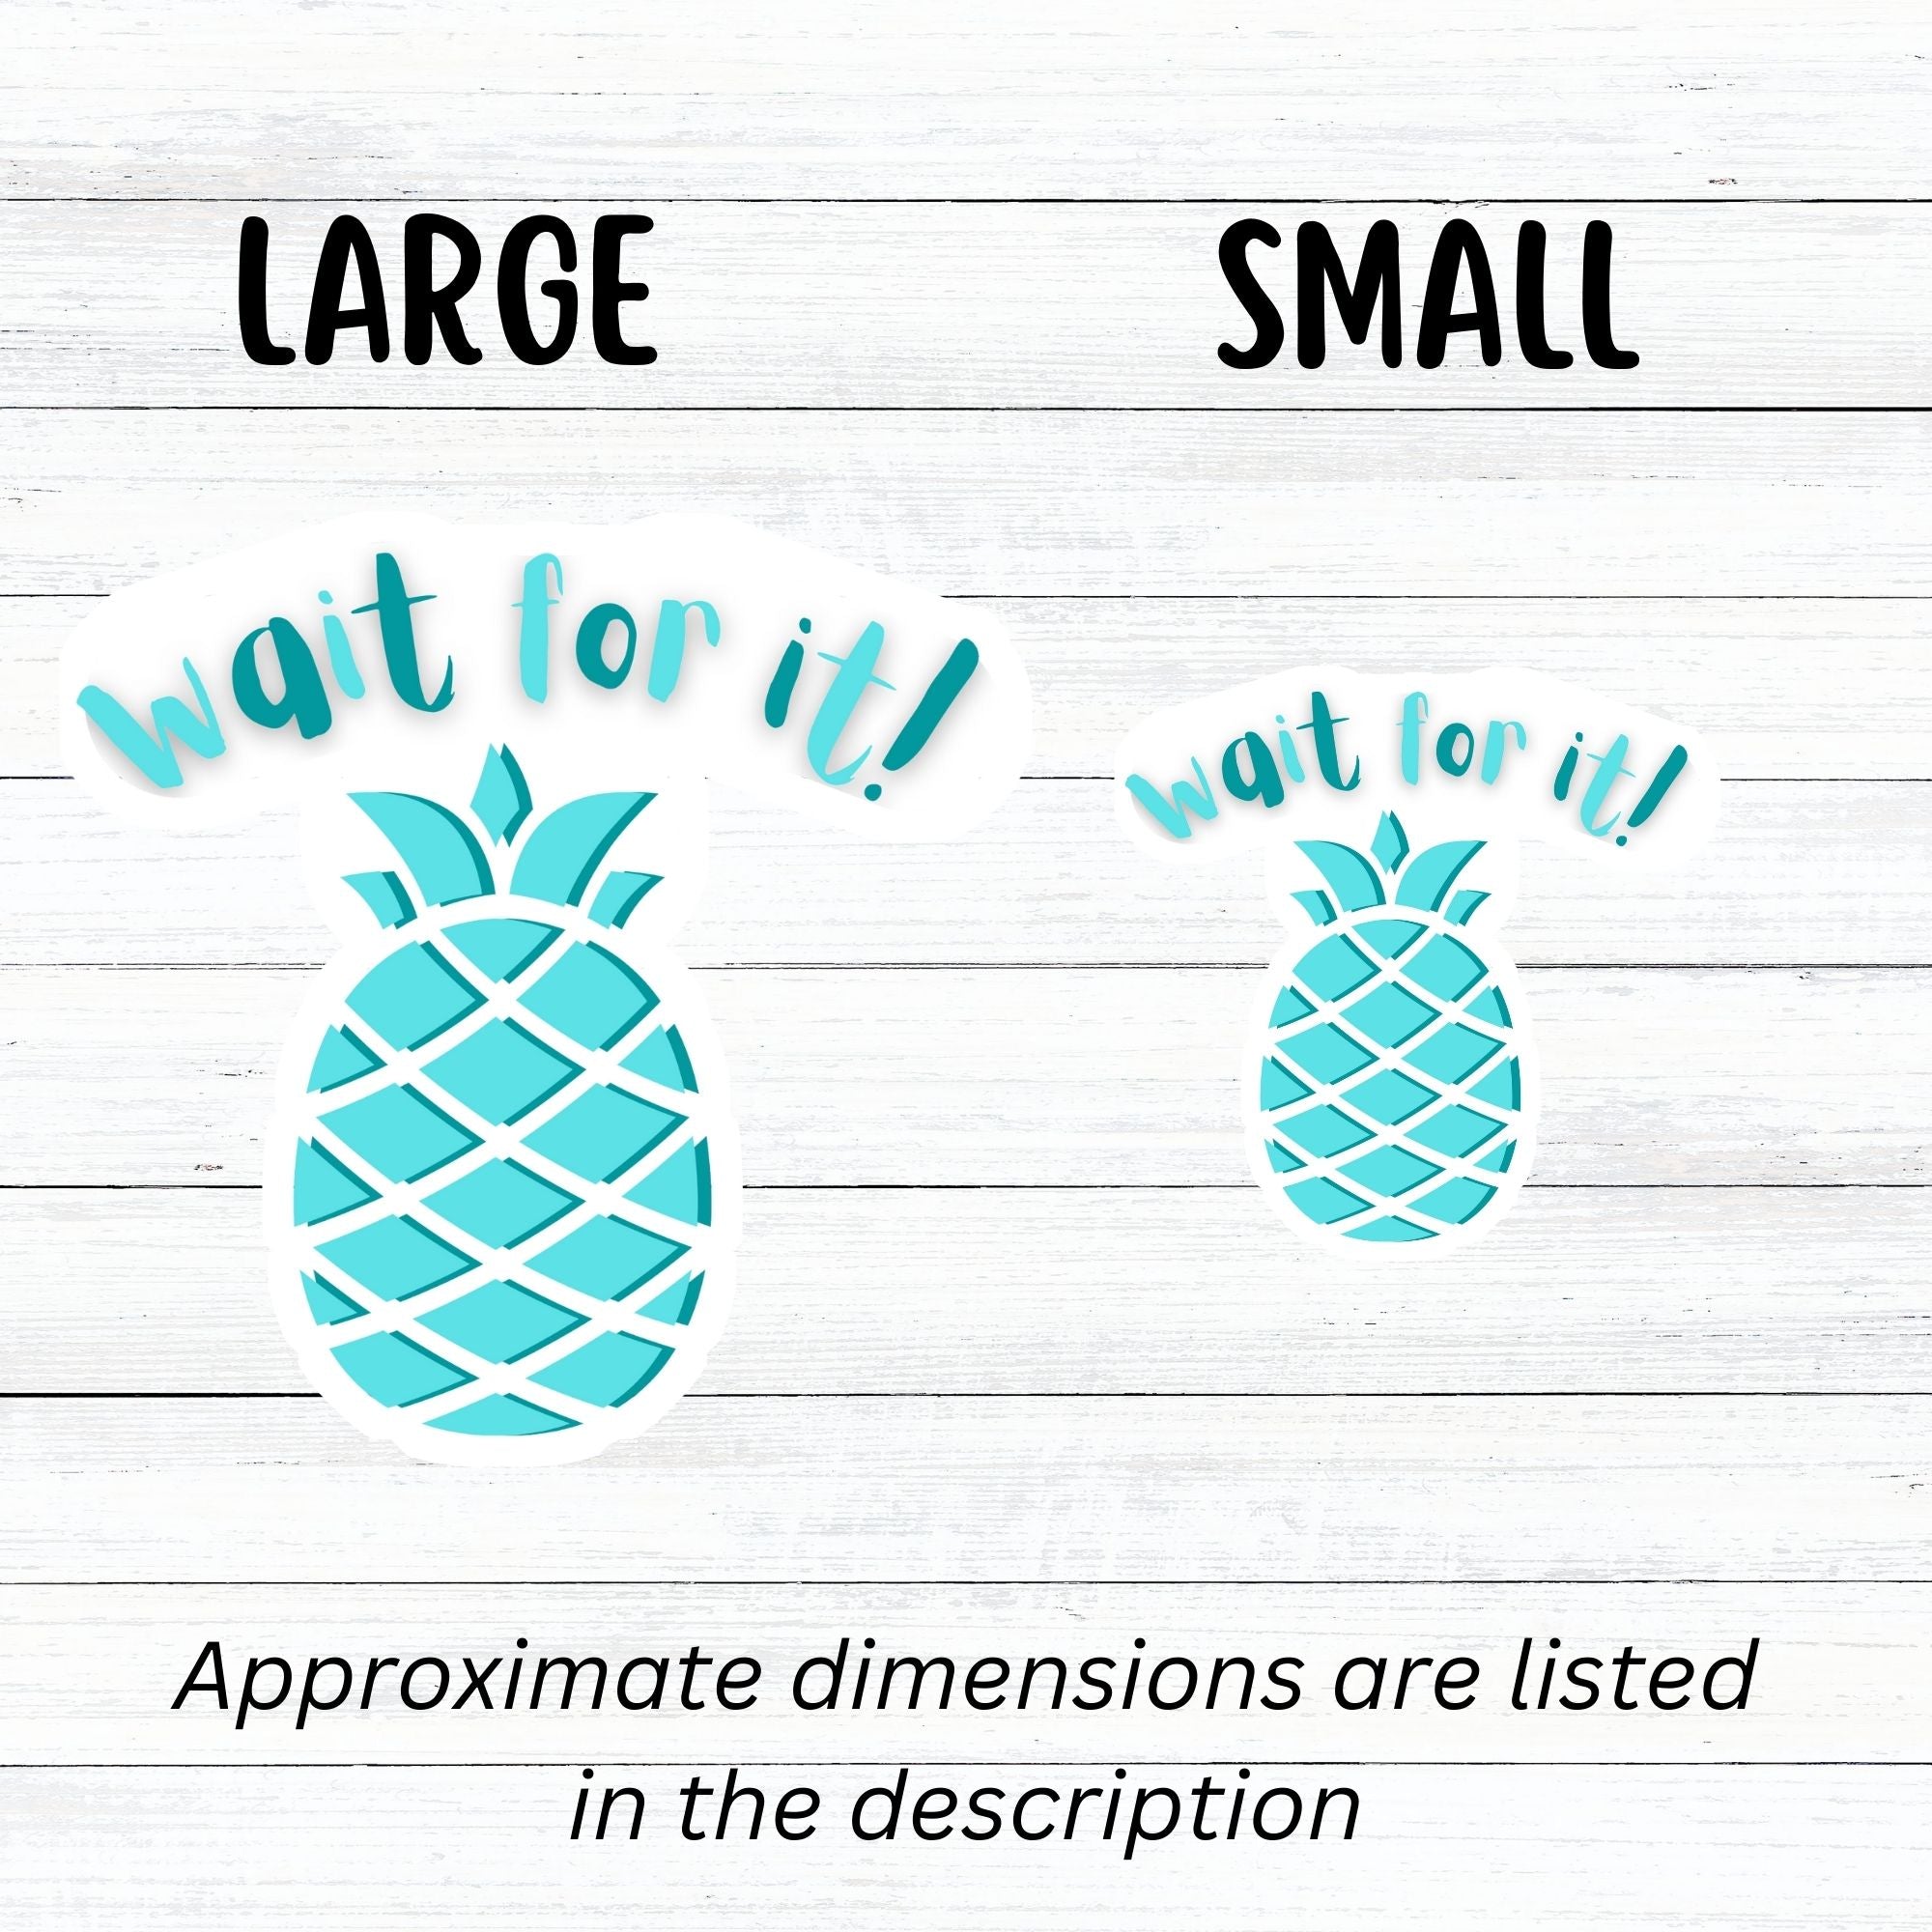 Don't get psyched out by this individual die-cut sticker! It features a teal blue pineapple with the words "Wait for it!" above. This image shows large and small Wait for it! stickers next to each other.